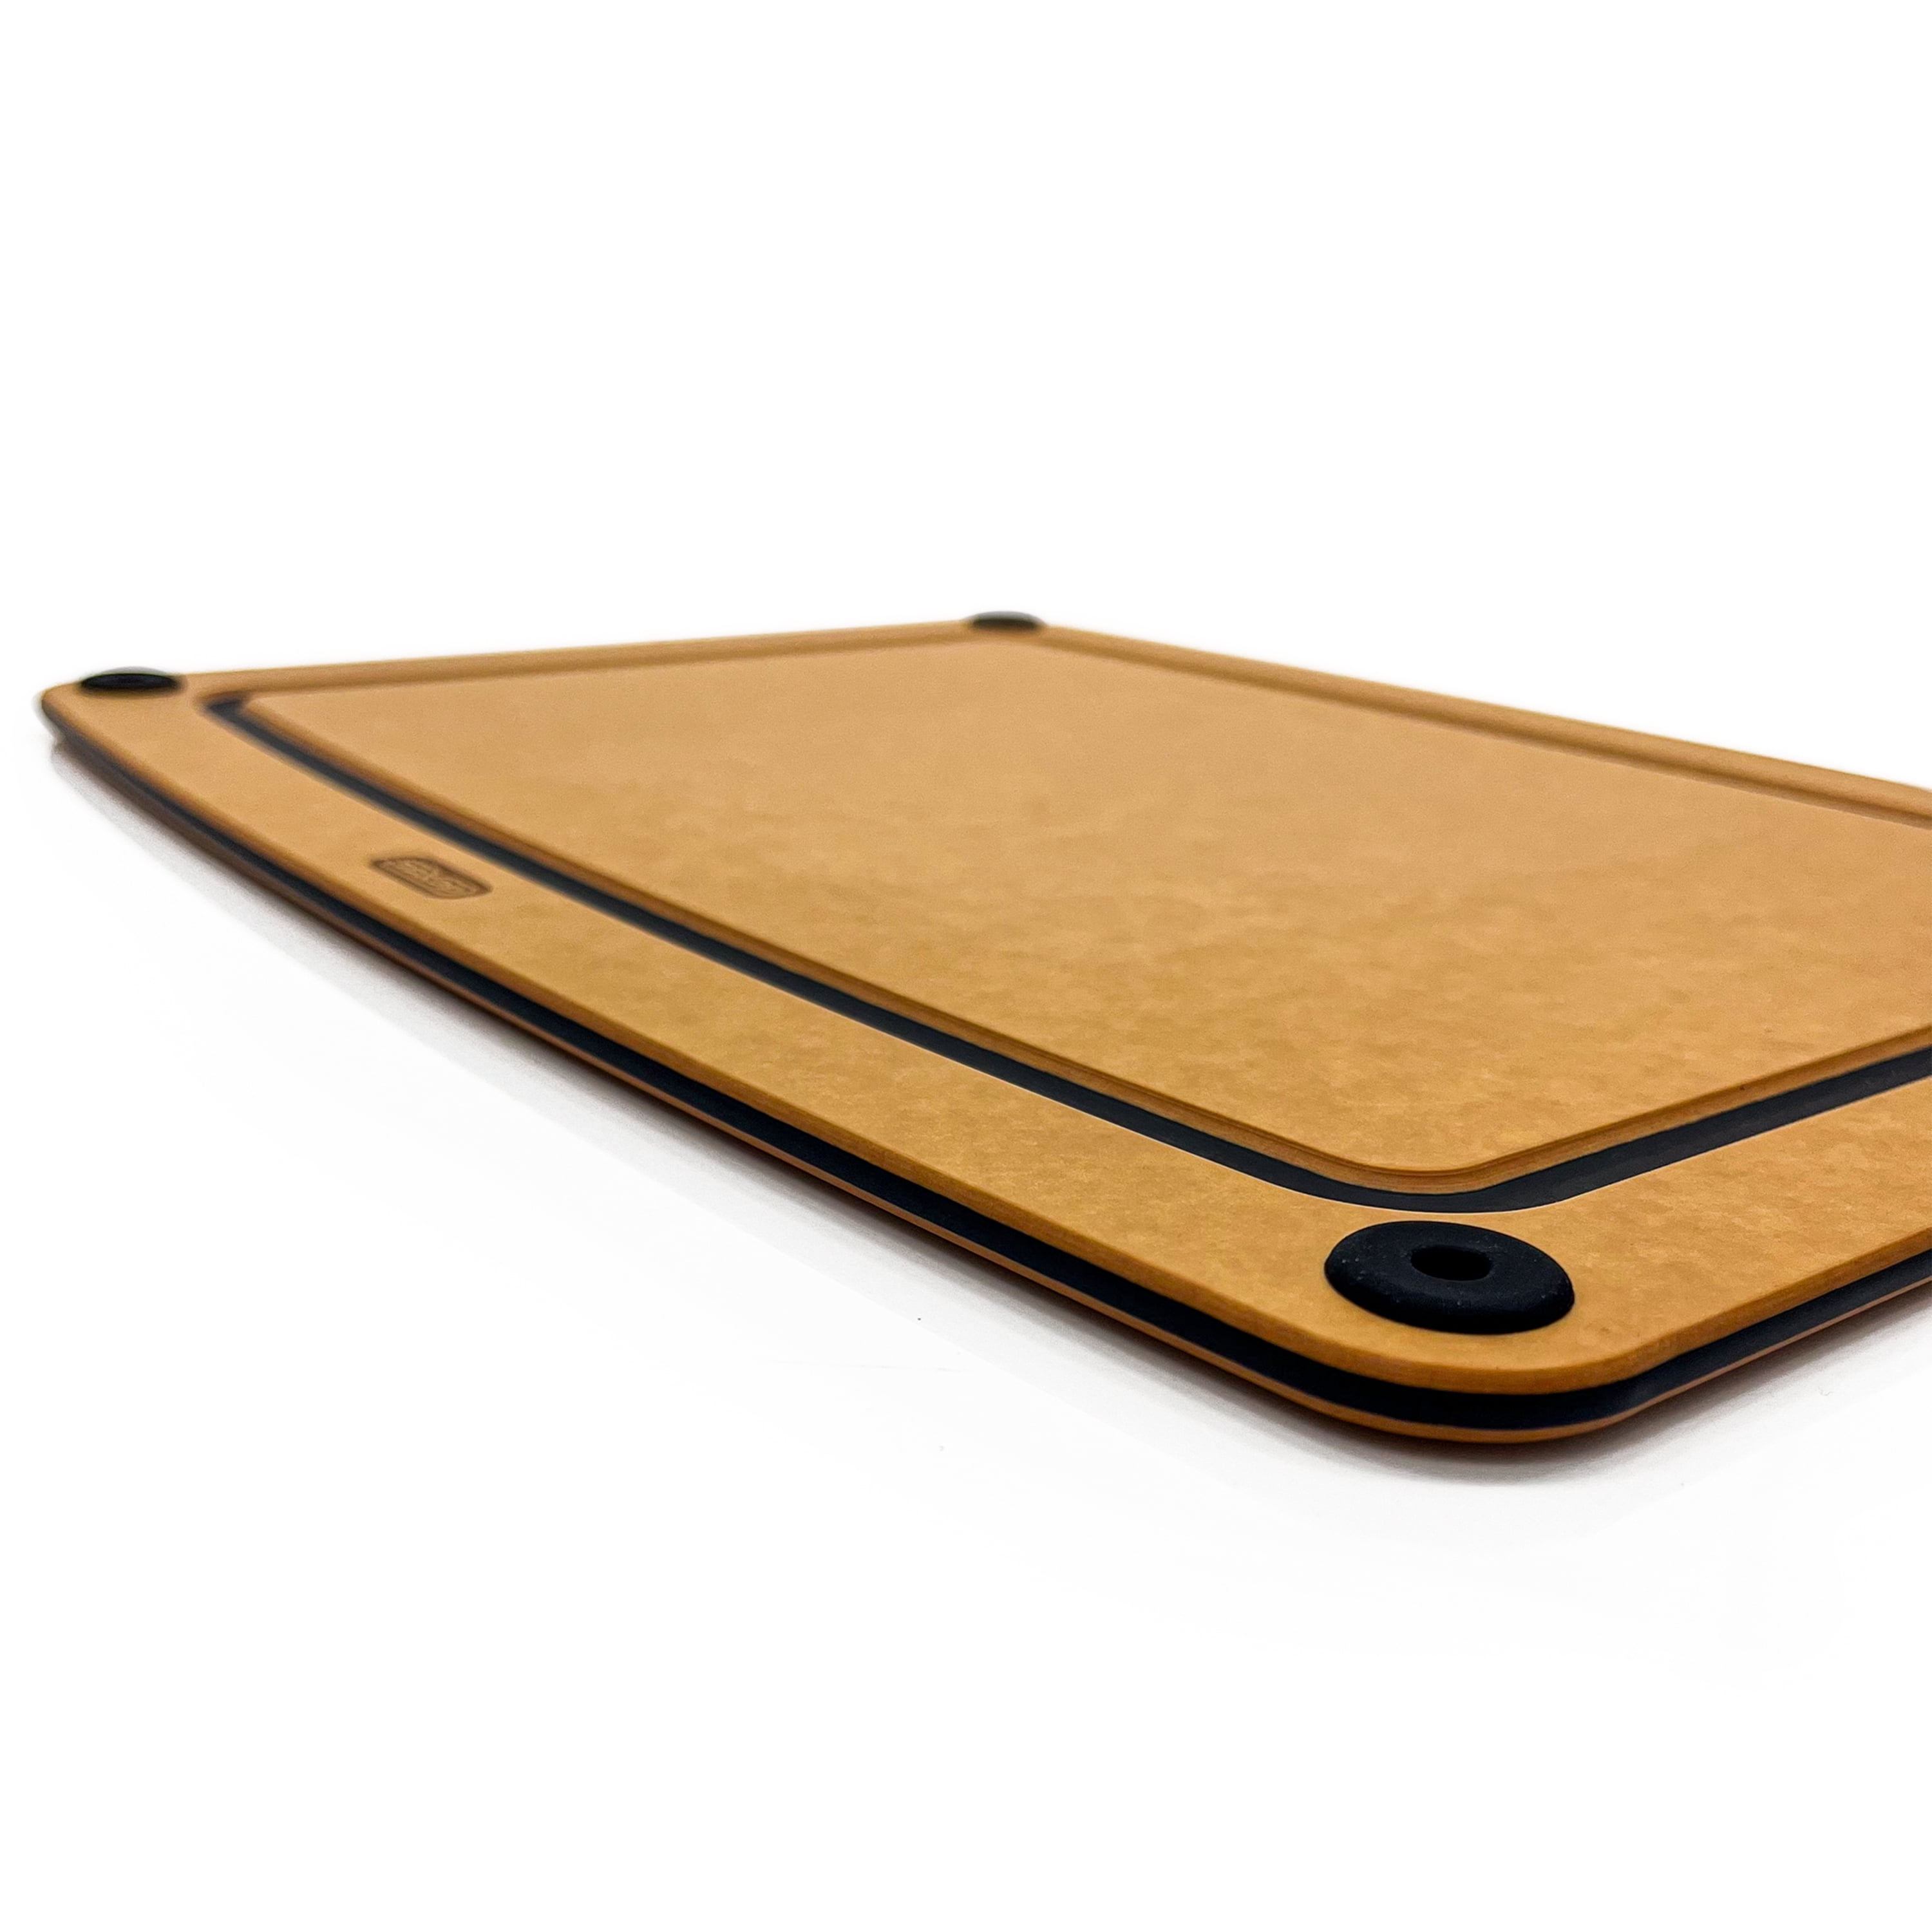 Cutting Board for Kitchen Dishwasher Safe, Wood Cutting Board, Natural Wood  Fiber Composite, Non-Porous, Reversible, Medium, 11.7 x 8.5-inch, Natural